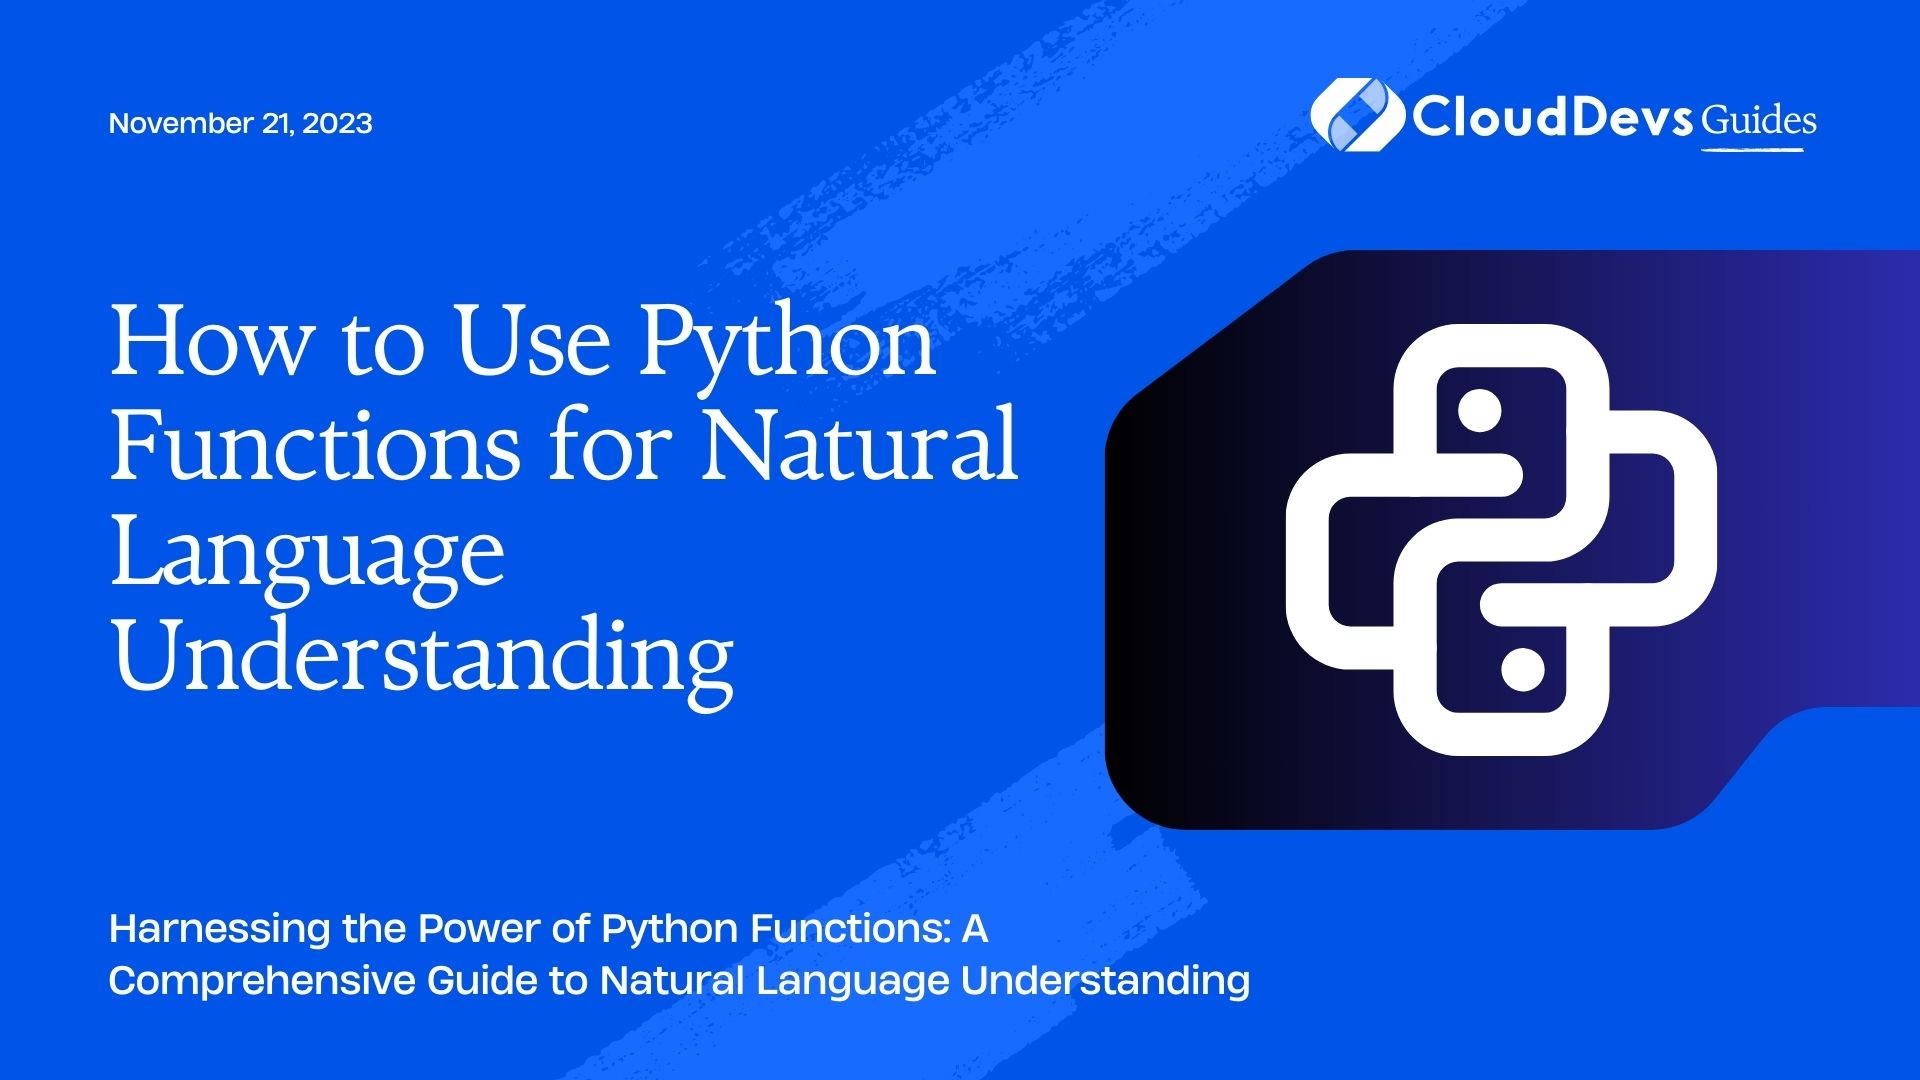 How to Use Python Functions for Natural Language Understanding